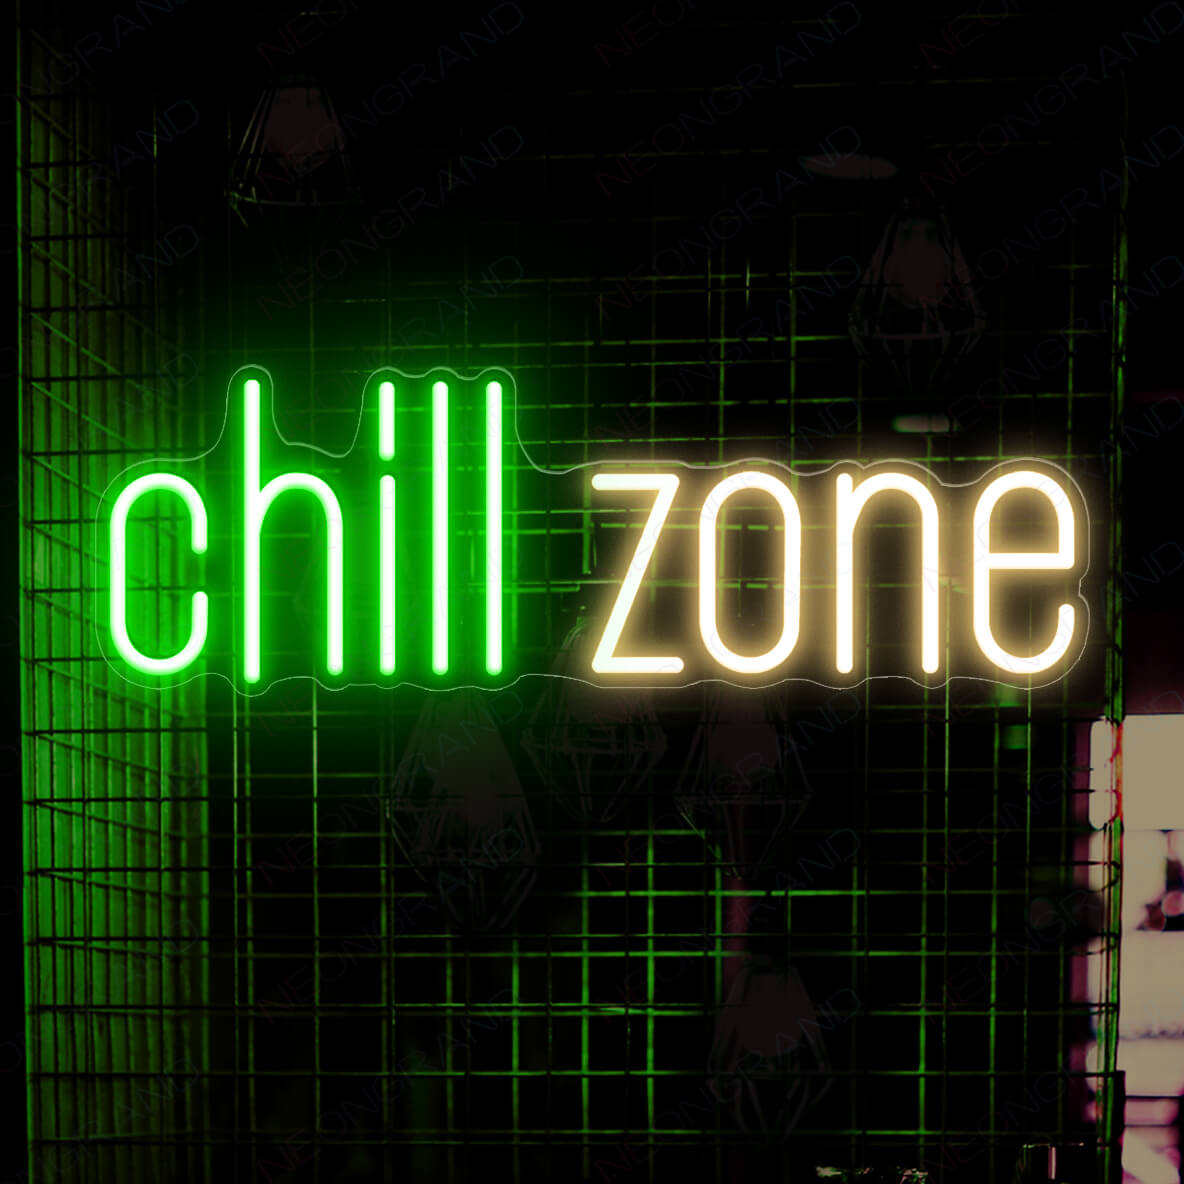 Chill Zone Neon Sign Led Chill Neon Light Sign gold yellow